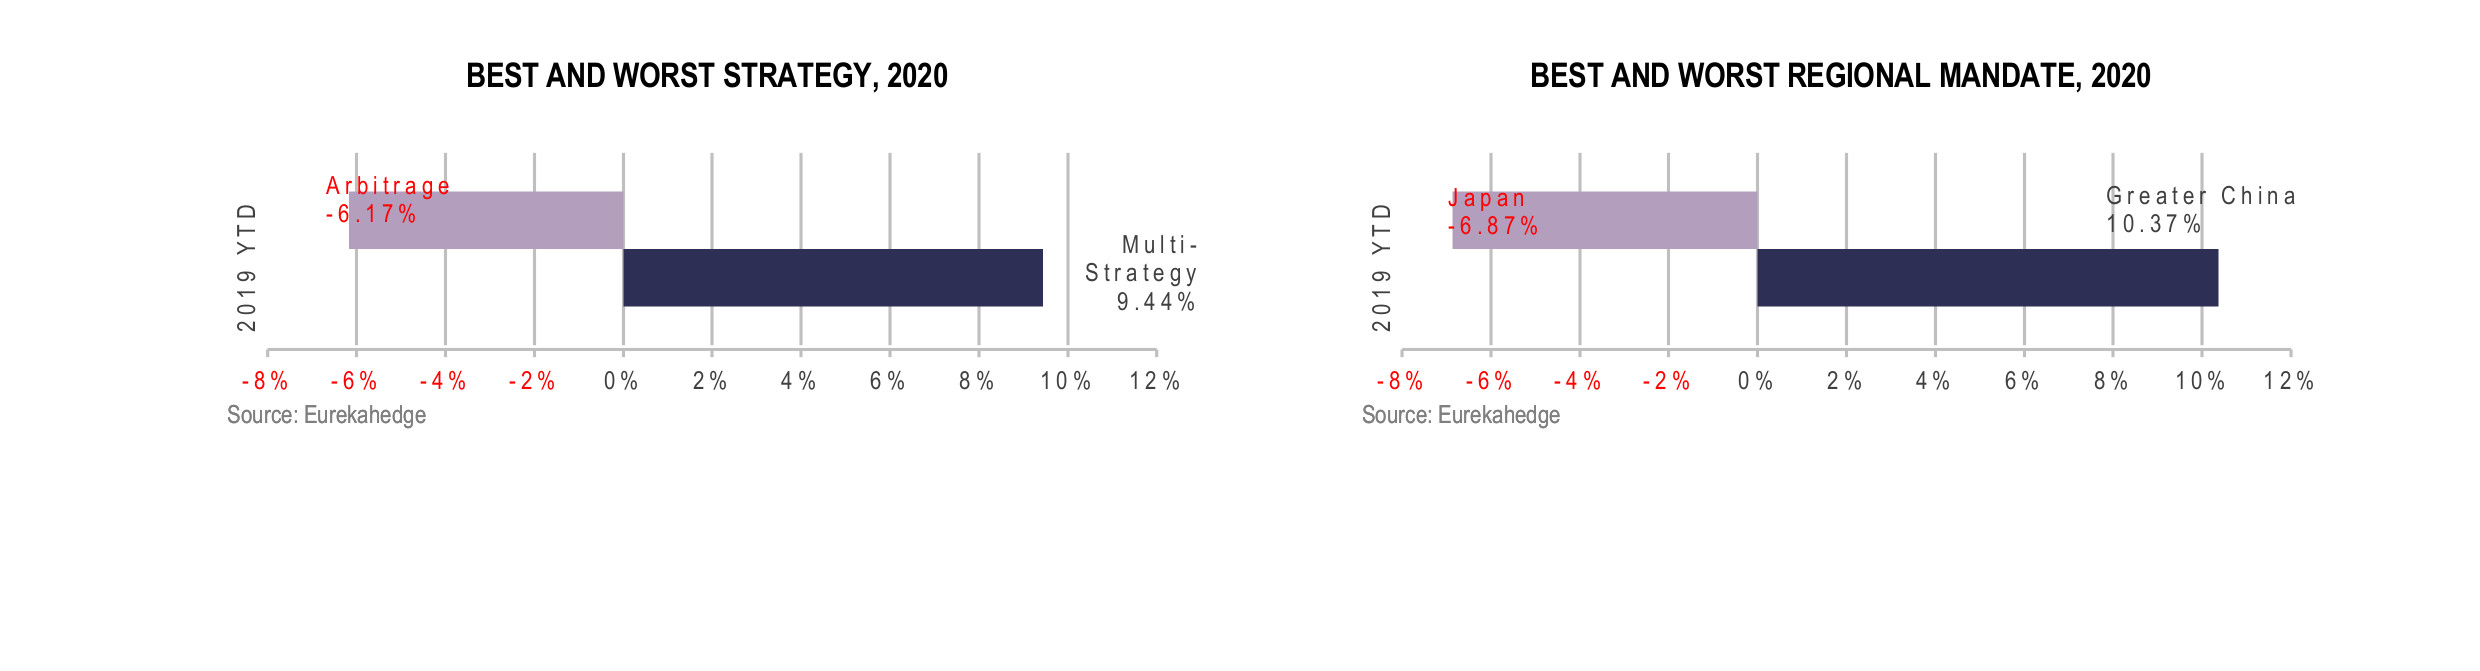 Asian Hedge Funds Infographic August 2020 - best and worst strategy and regional mandate 2020